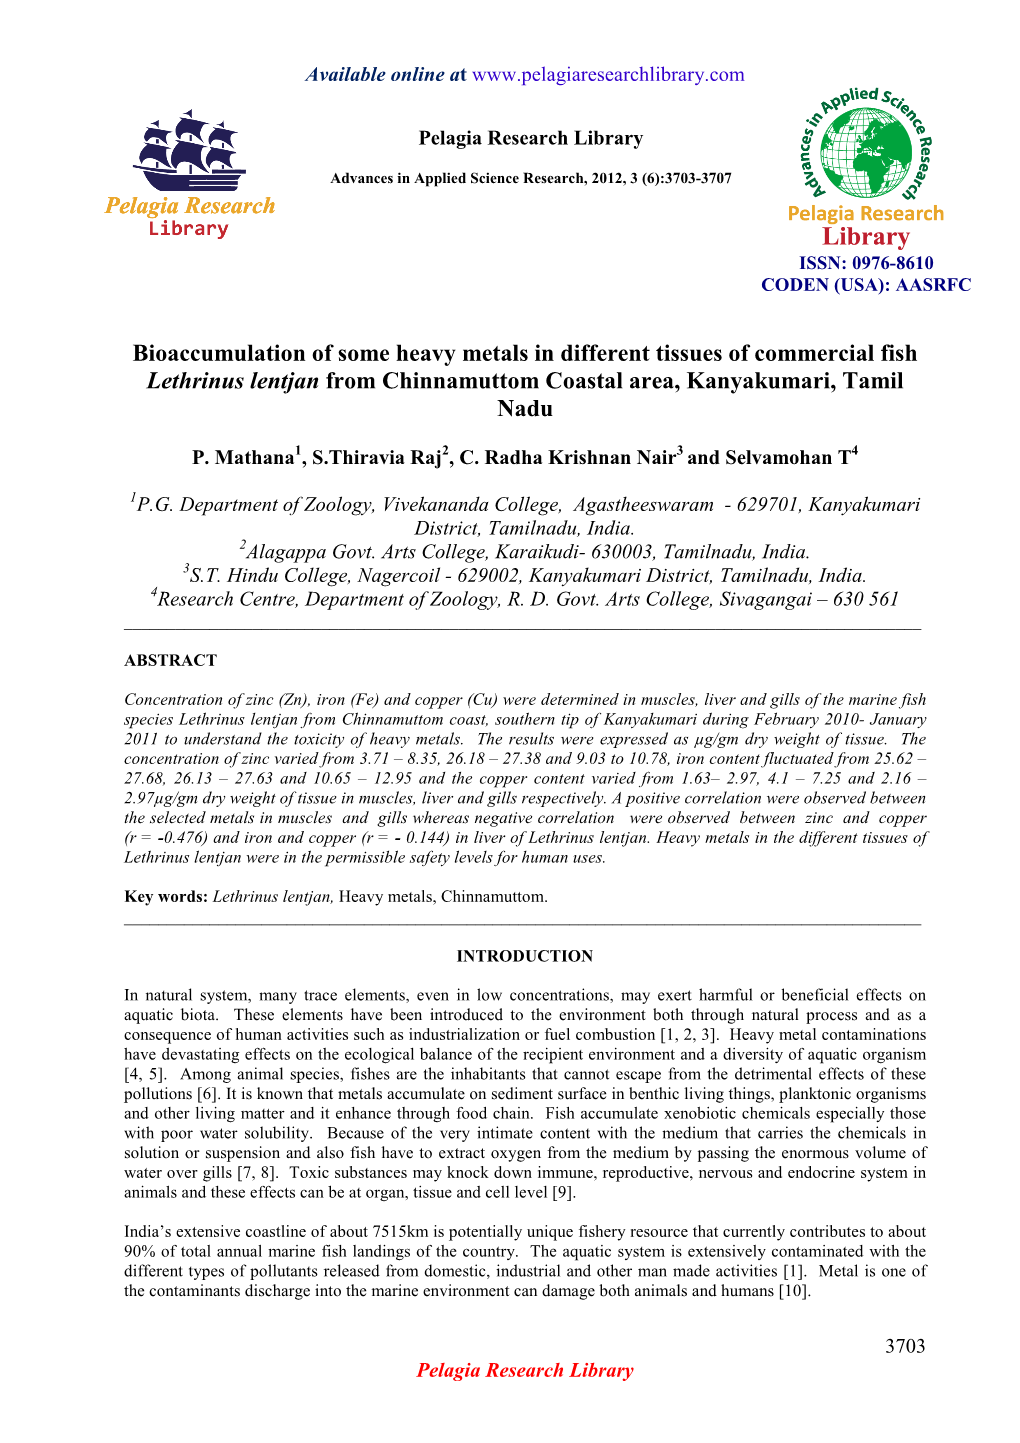 Bioaccumulation of Some Heavy Metals in Different Tissues of Commercial Fish Lethrinus Lentjan from Chinnamuttom Coastal Area, Kanyakumari, Tamil Nadu